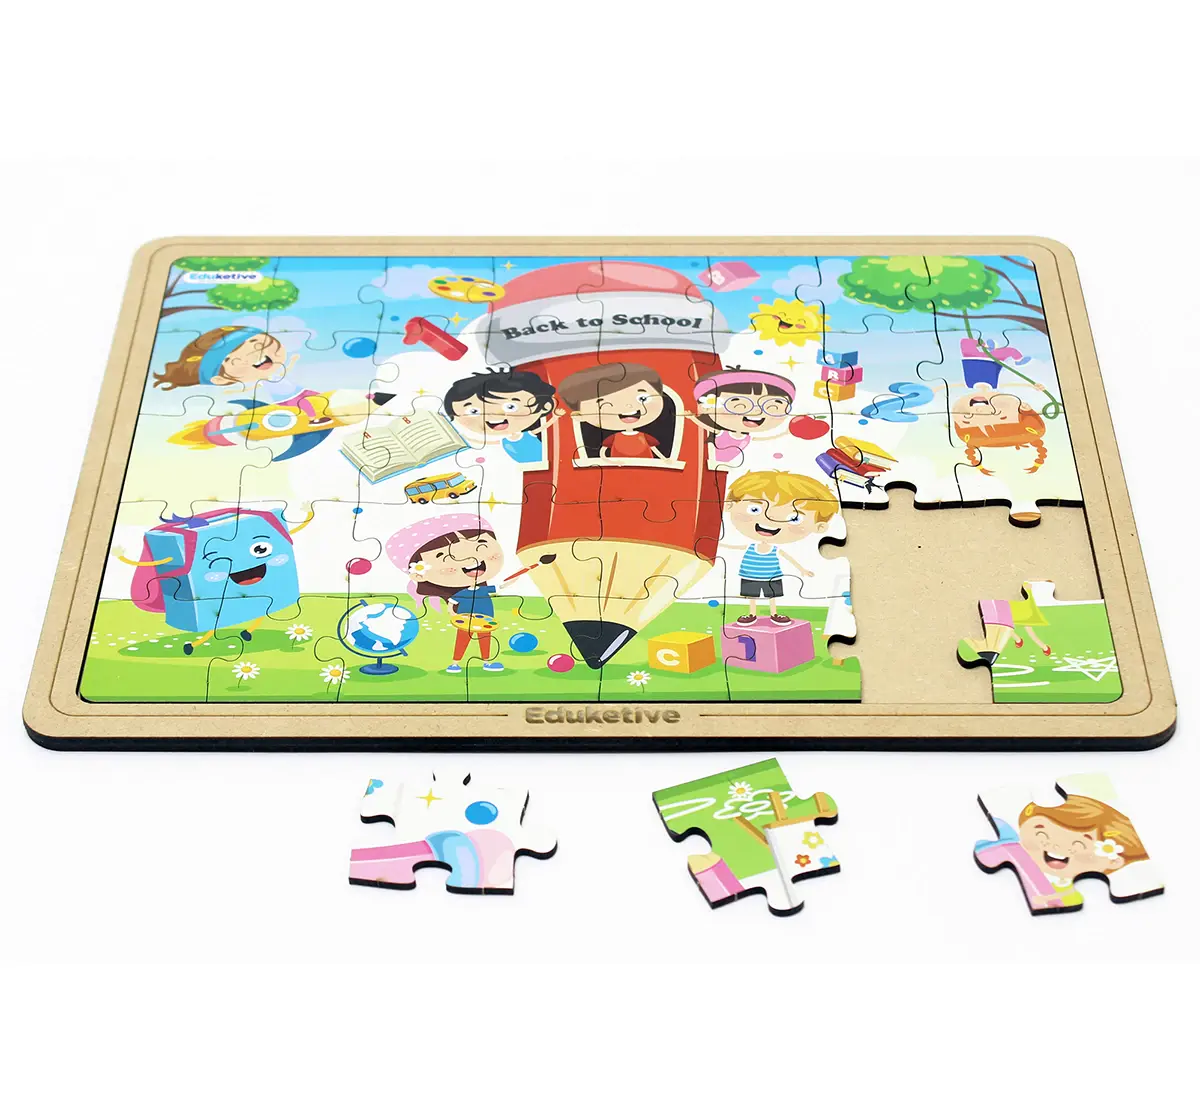 Eduketive PuzzleDecor Back to School Decorative 40 Pieces Jigsaw Puzzle with Stand Kids Age 3-9 Years Preschool